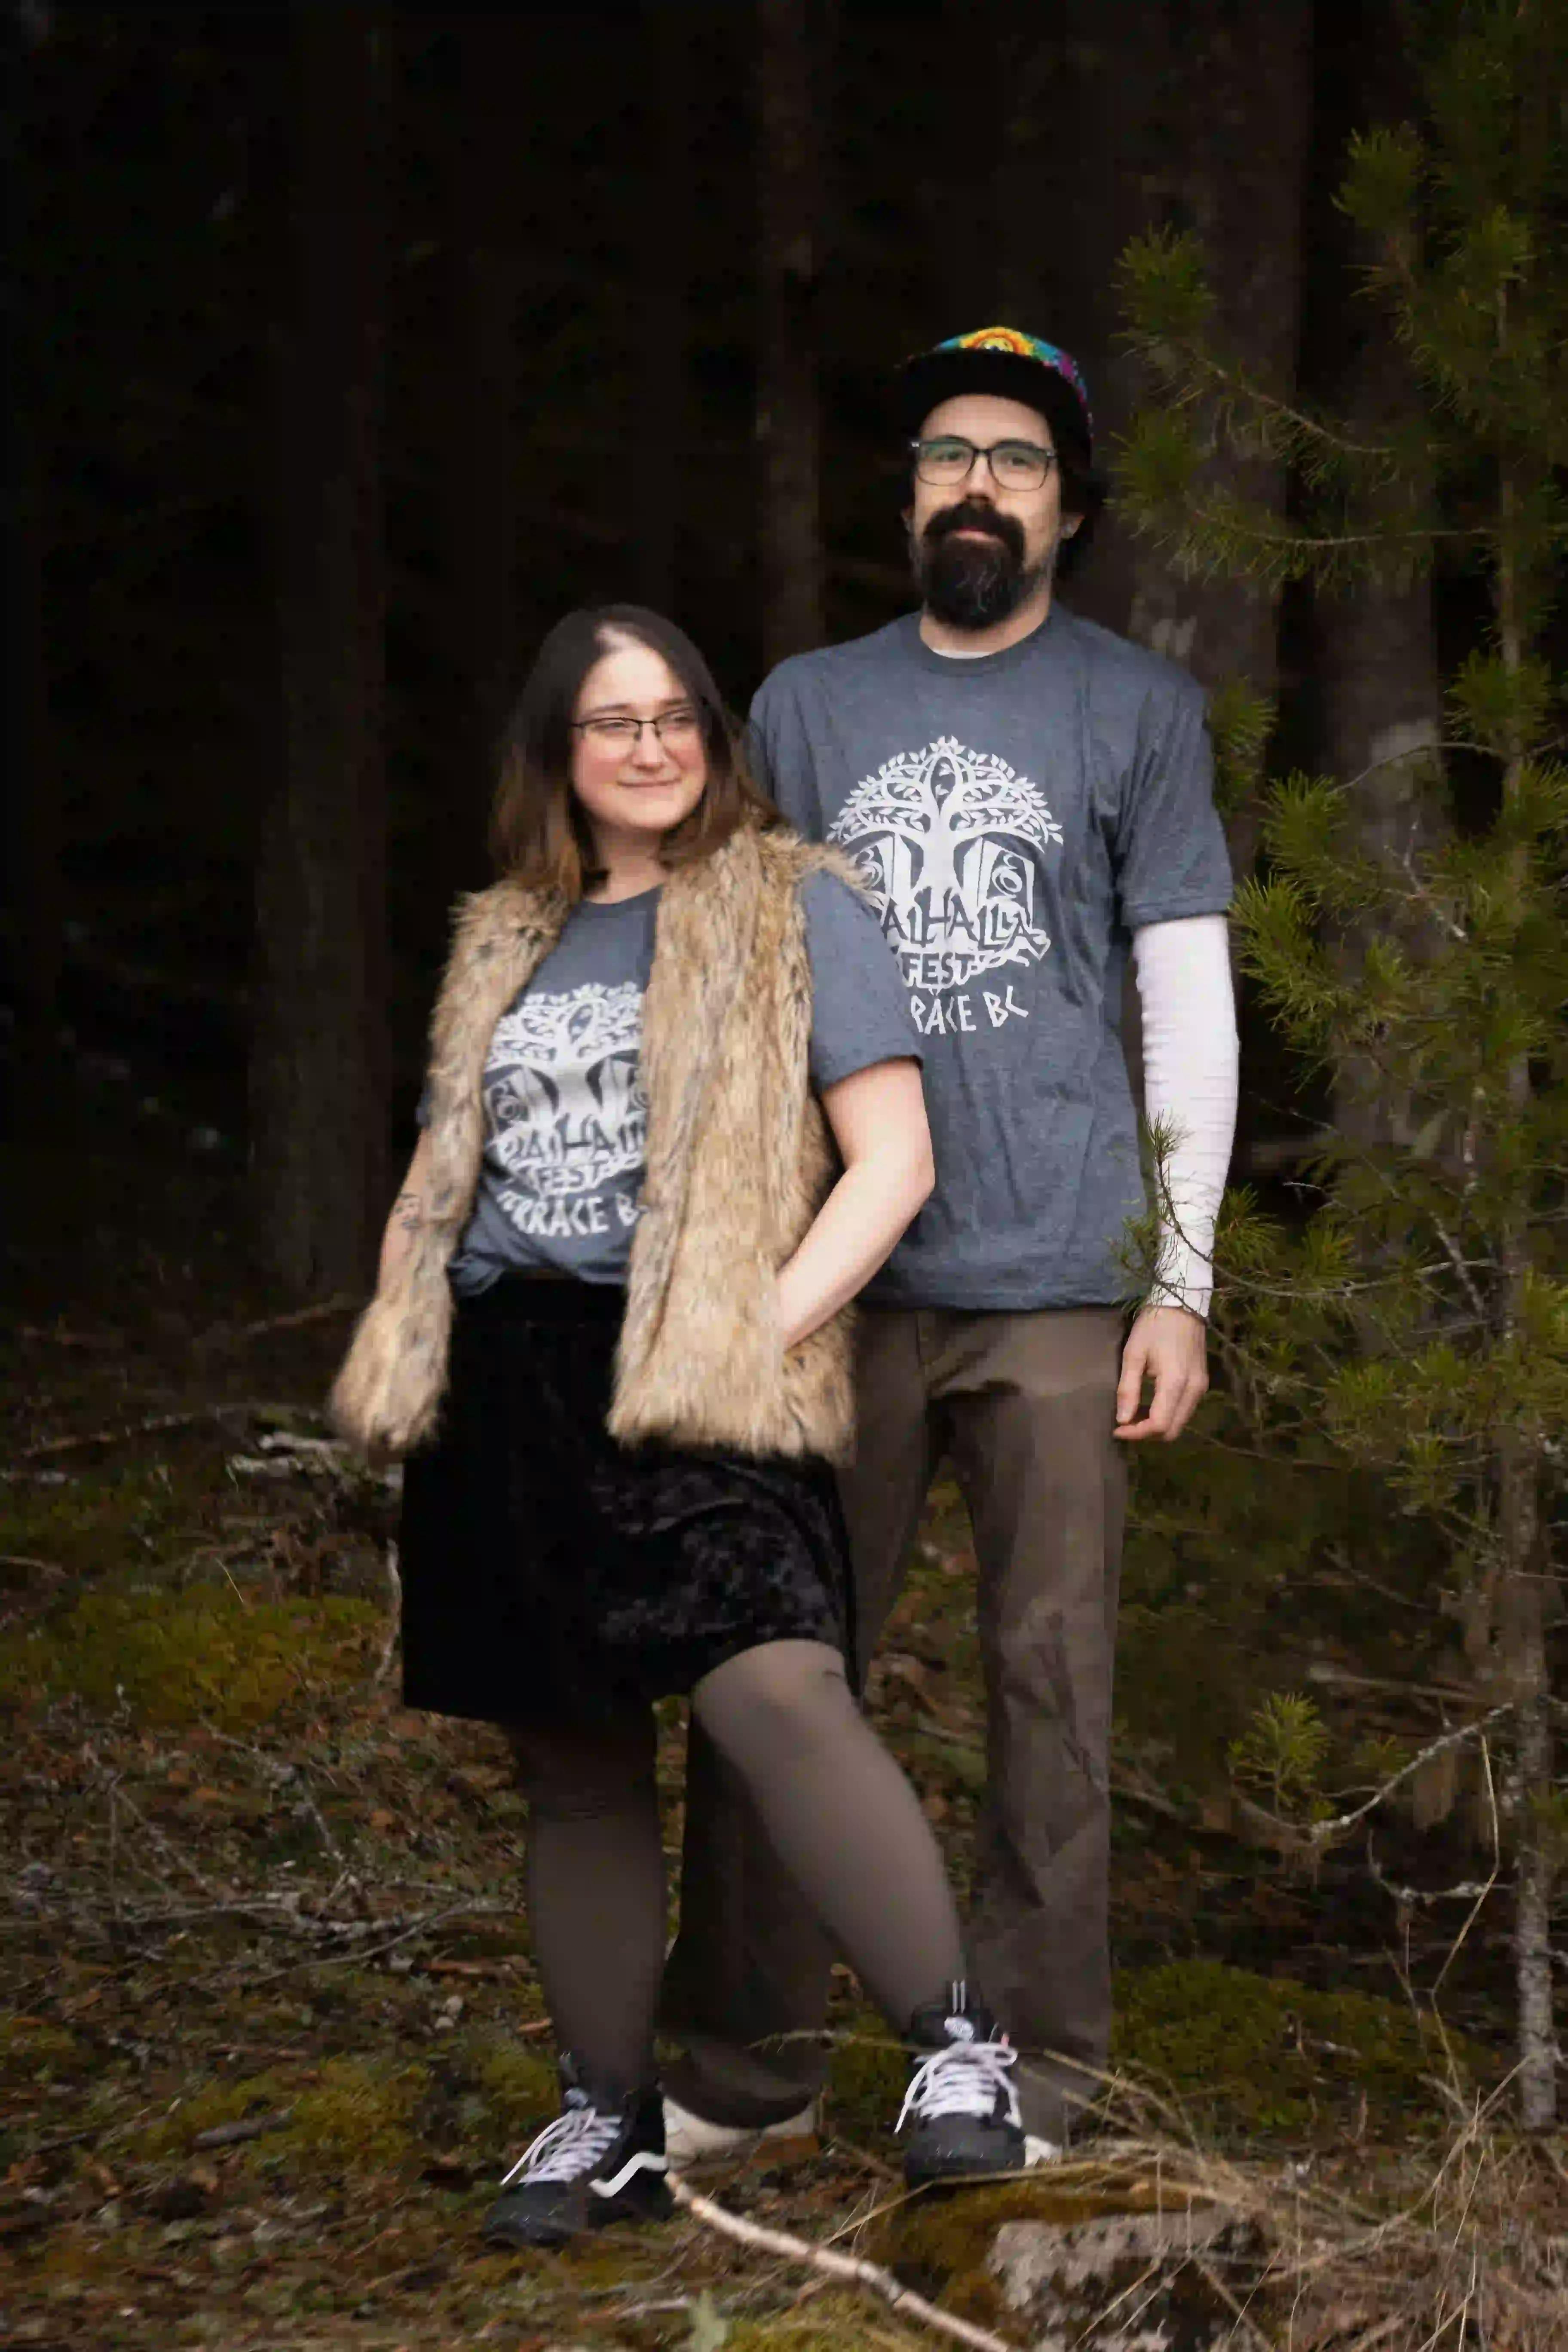 Couple in forest with ValhallaFest t-shirts.